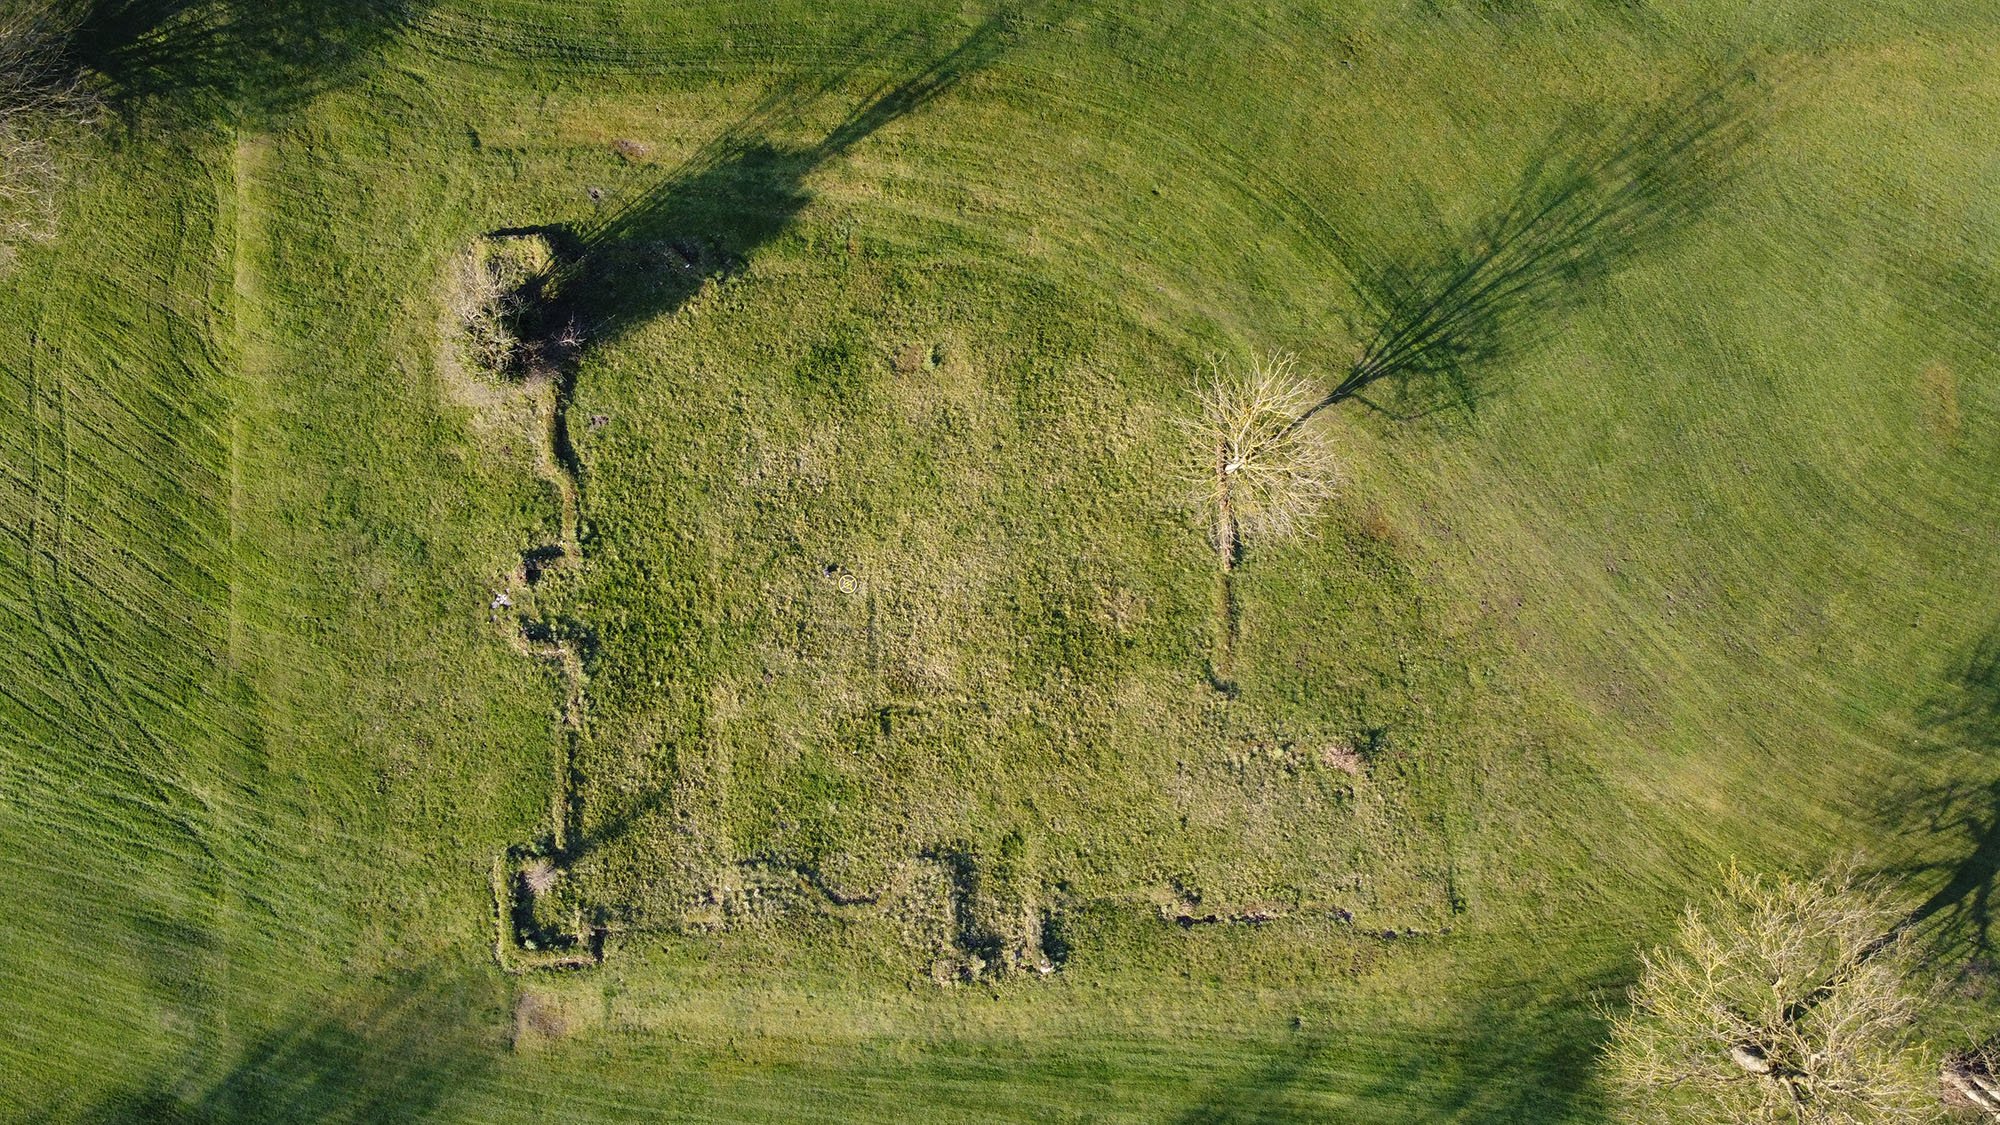 A vertical image shows the outline of Belhus Hall, formerly on the site of Belhus Park golf course